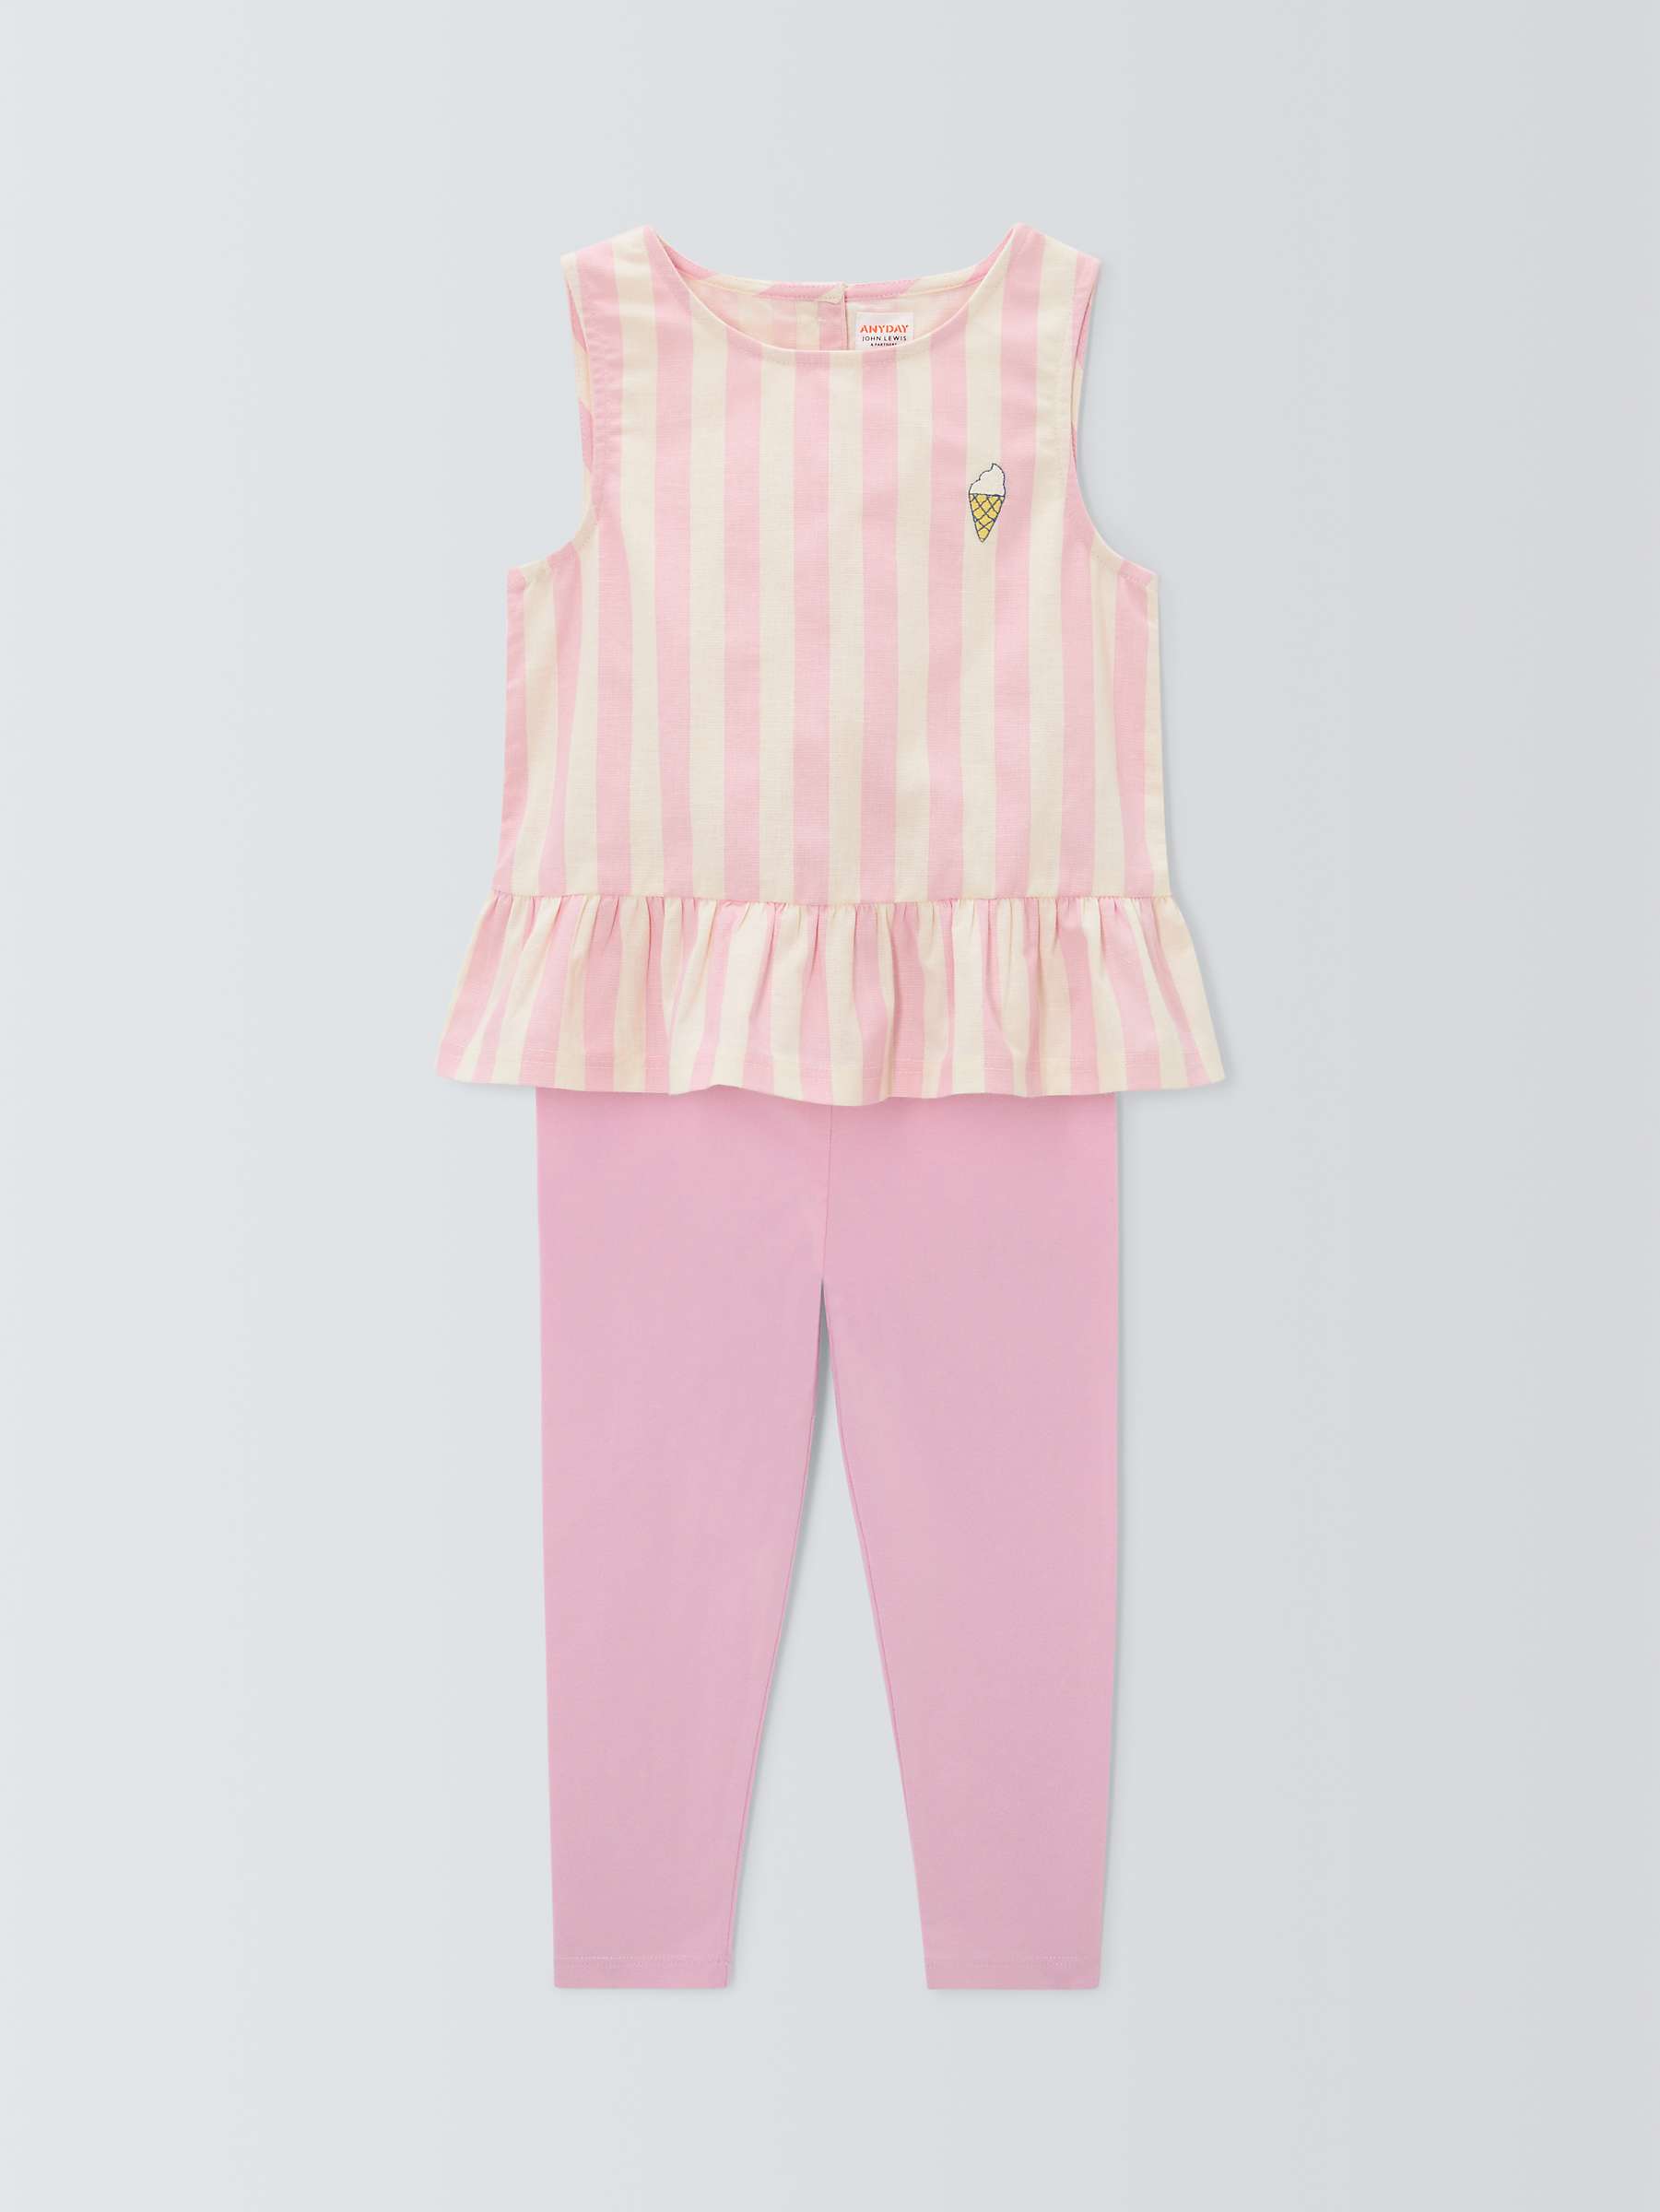 Buy John Lewis ANYDAY Baby Peplum Top and Leggings Outfit, Pink Online at johnlewis.com